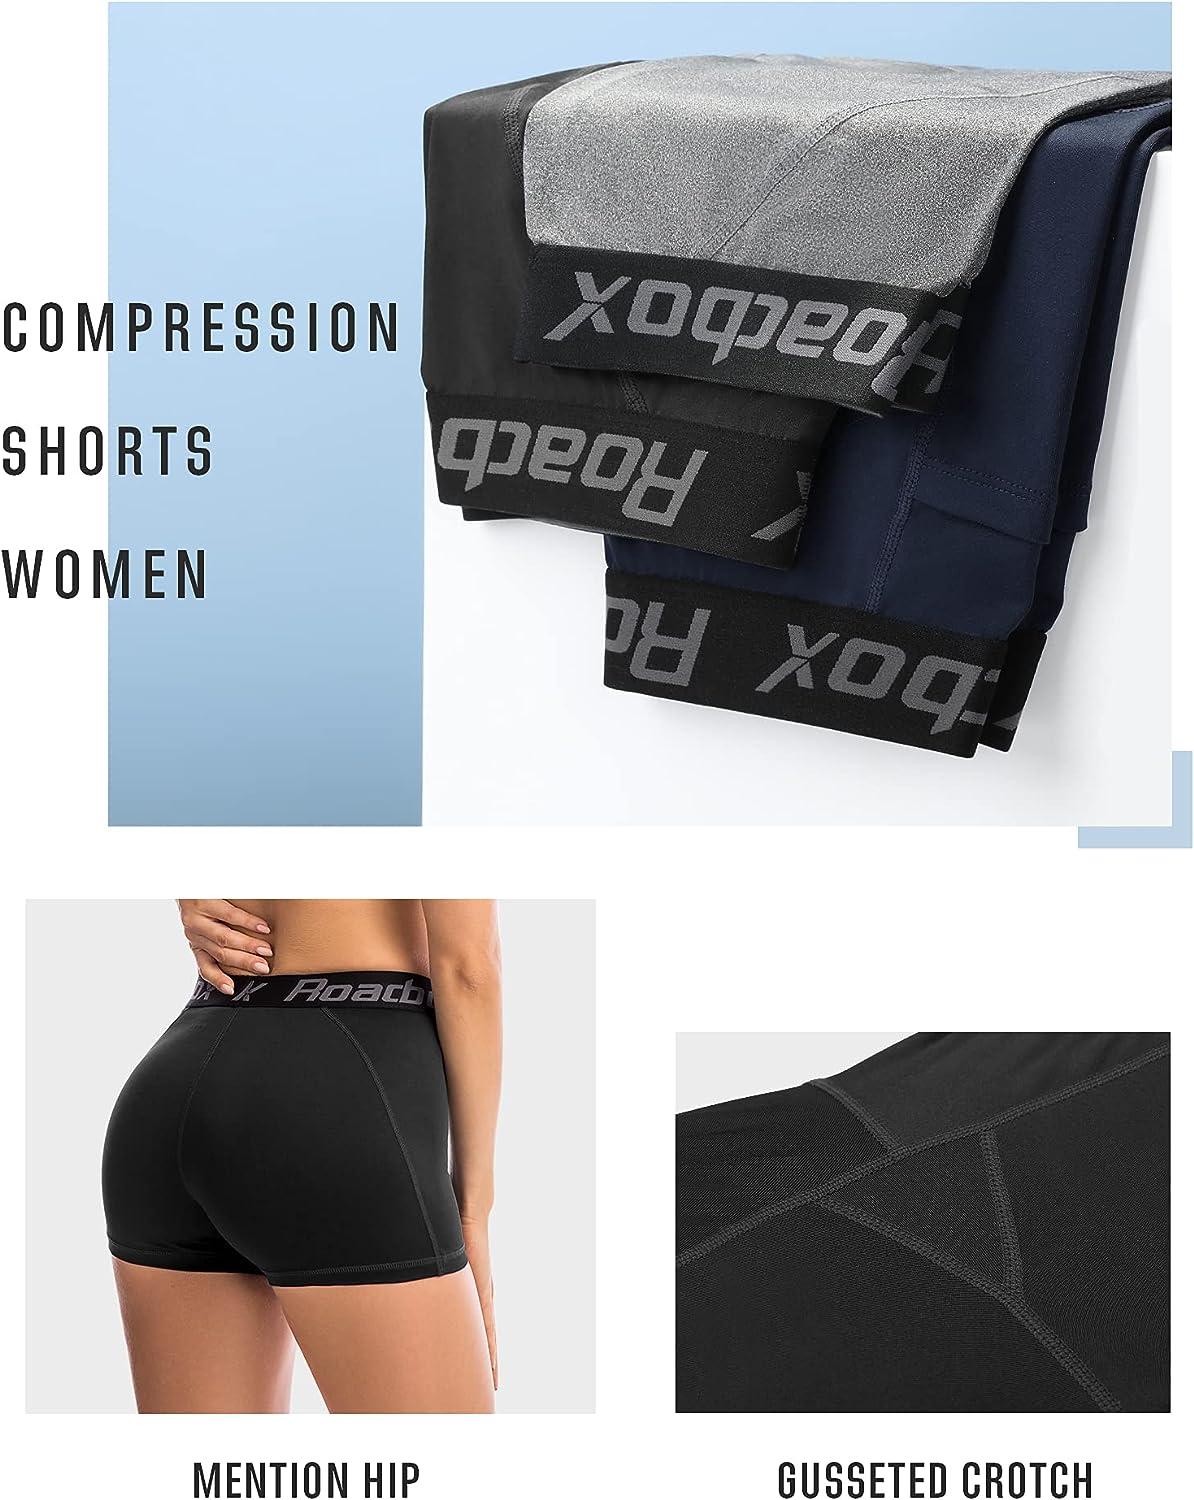 Roadbox Compression Shorts Women 3/5 Volleyball Shorts with Pocket/Non- Pocket Cool Dry for Running Workout Yoga Swimming Black+black+black Medium